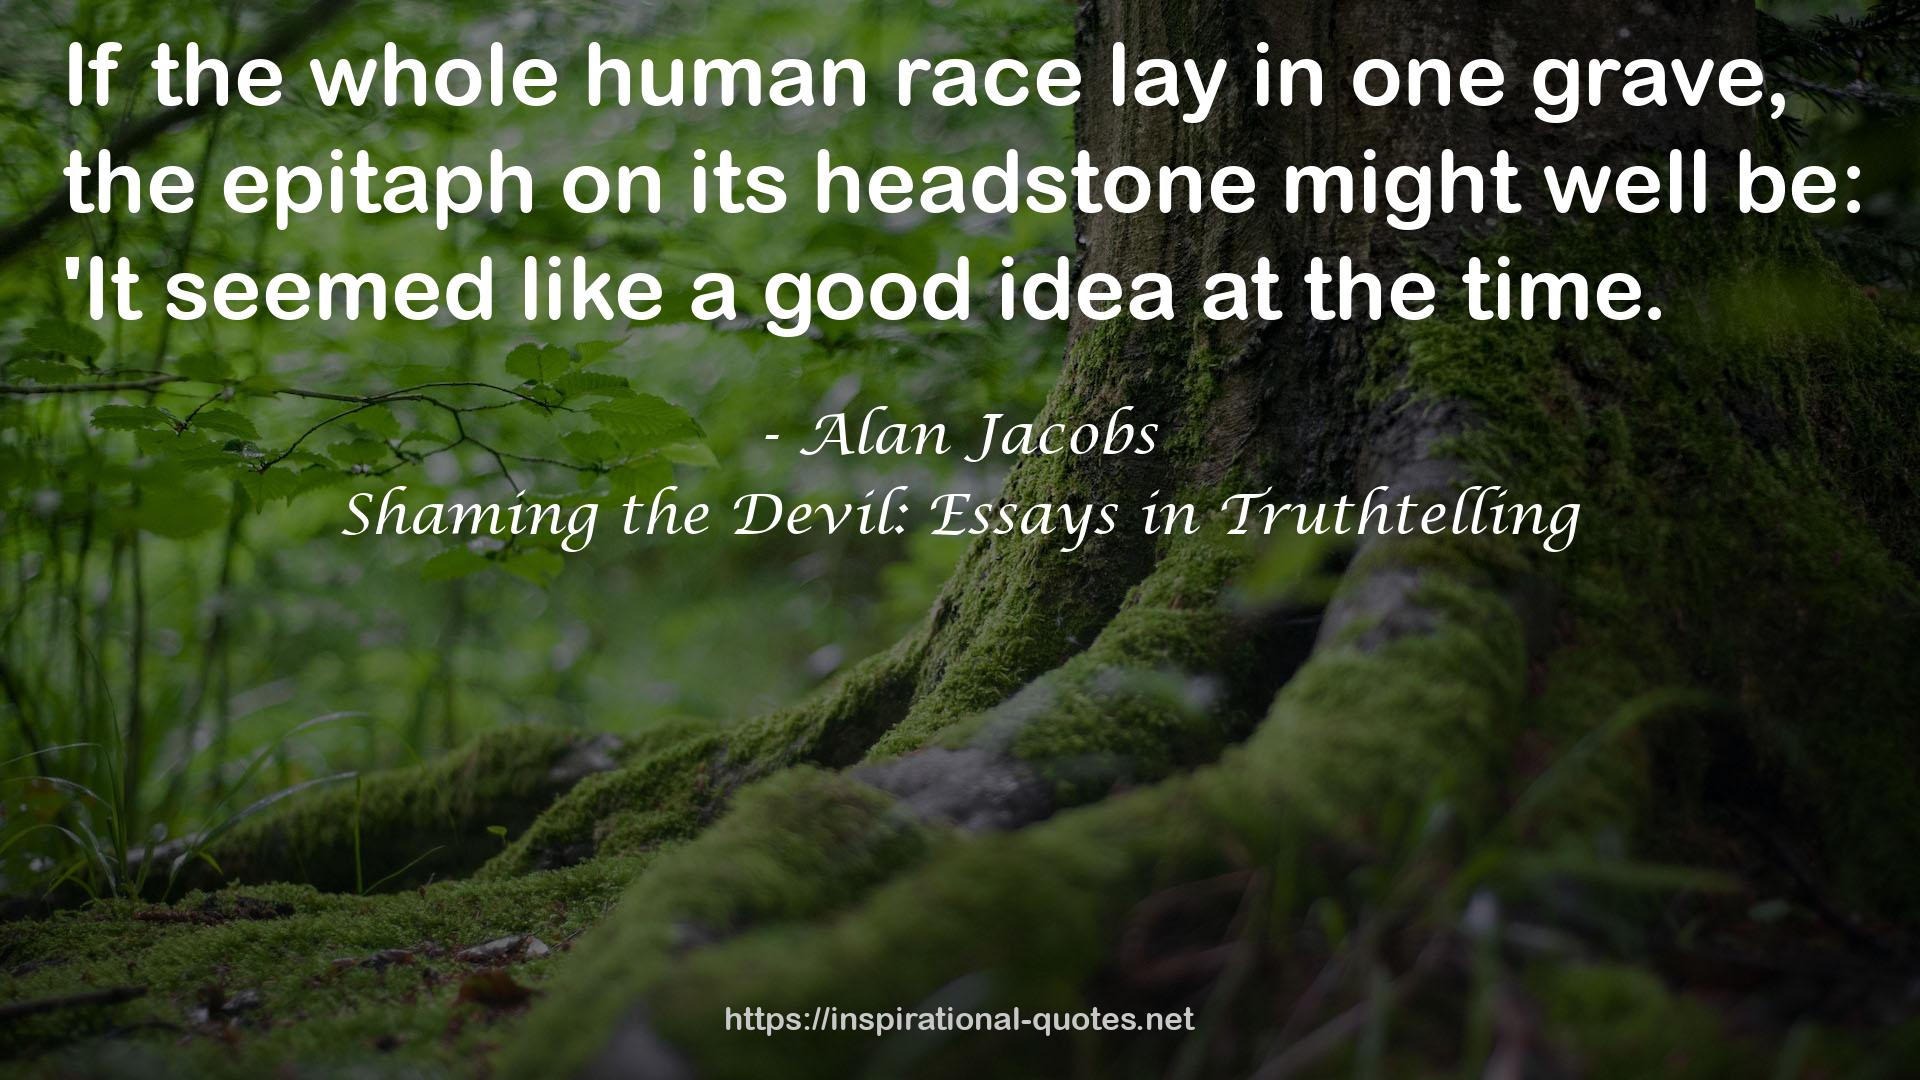 Shaming the Devil: Essays in Truthtelling QUOTES